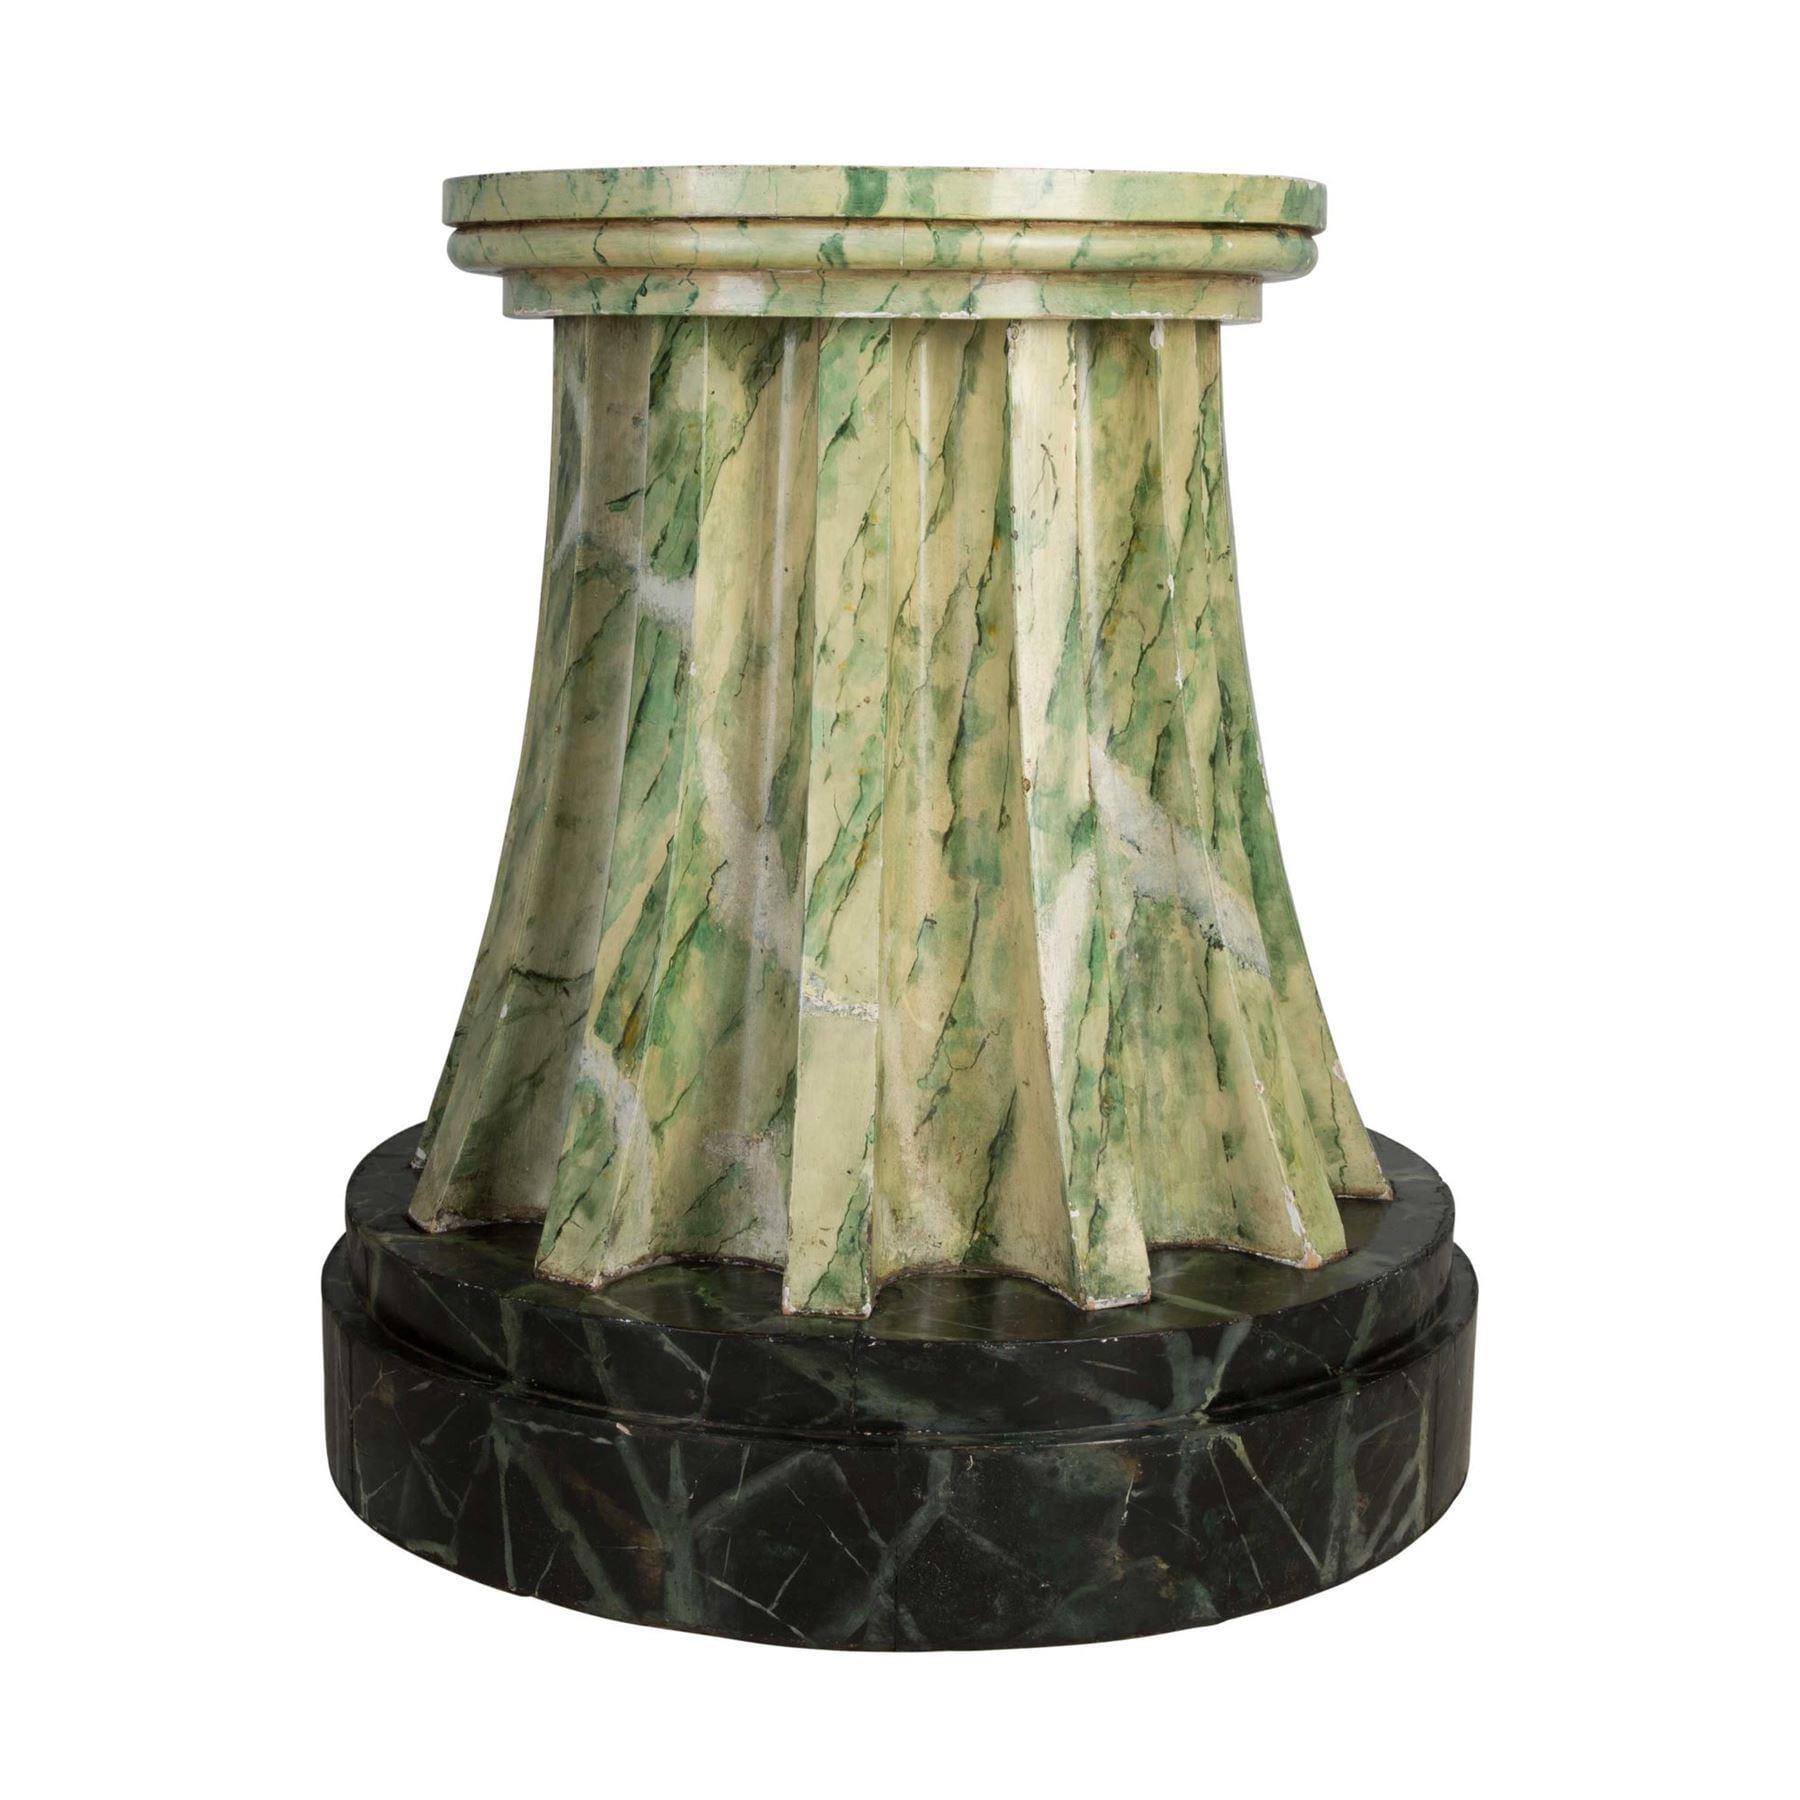 Regency Marbleized Fluted Column/Pedestal In Good Condition For Sale In Shipston-On-Stour, GB